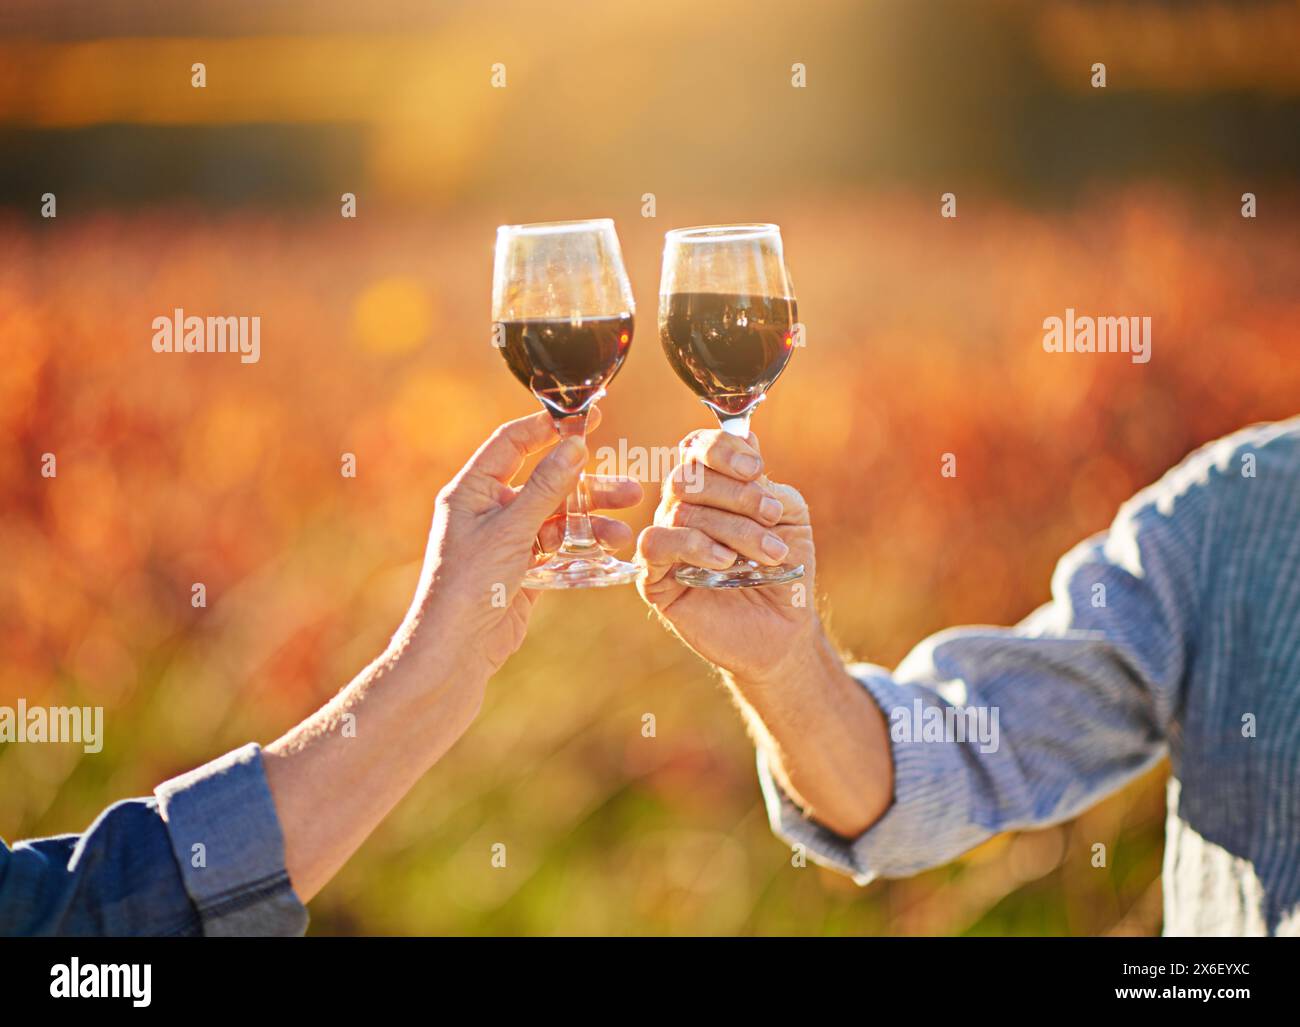 Cheers, wine glasses and hands in outdoor for love, romance and relax in vineyard or nature. Elderly people, senior couple and alcohol drink on Stock Photo